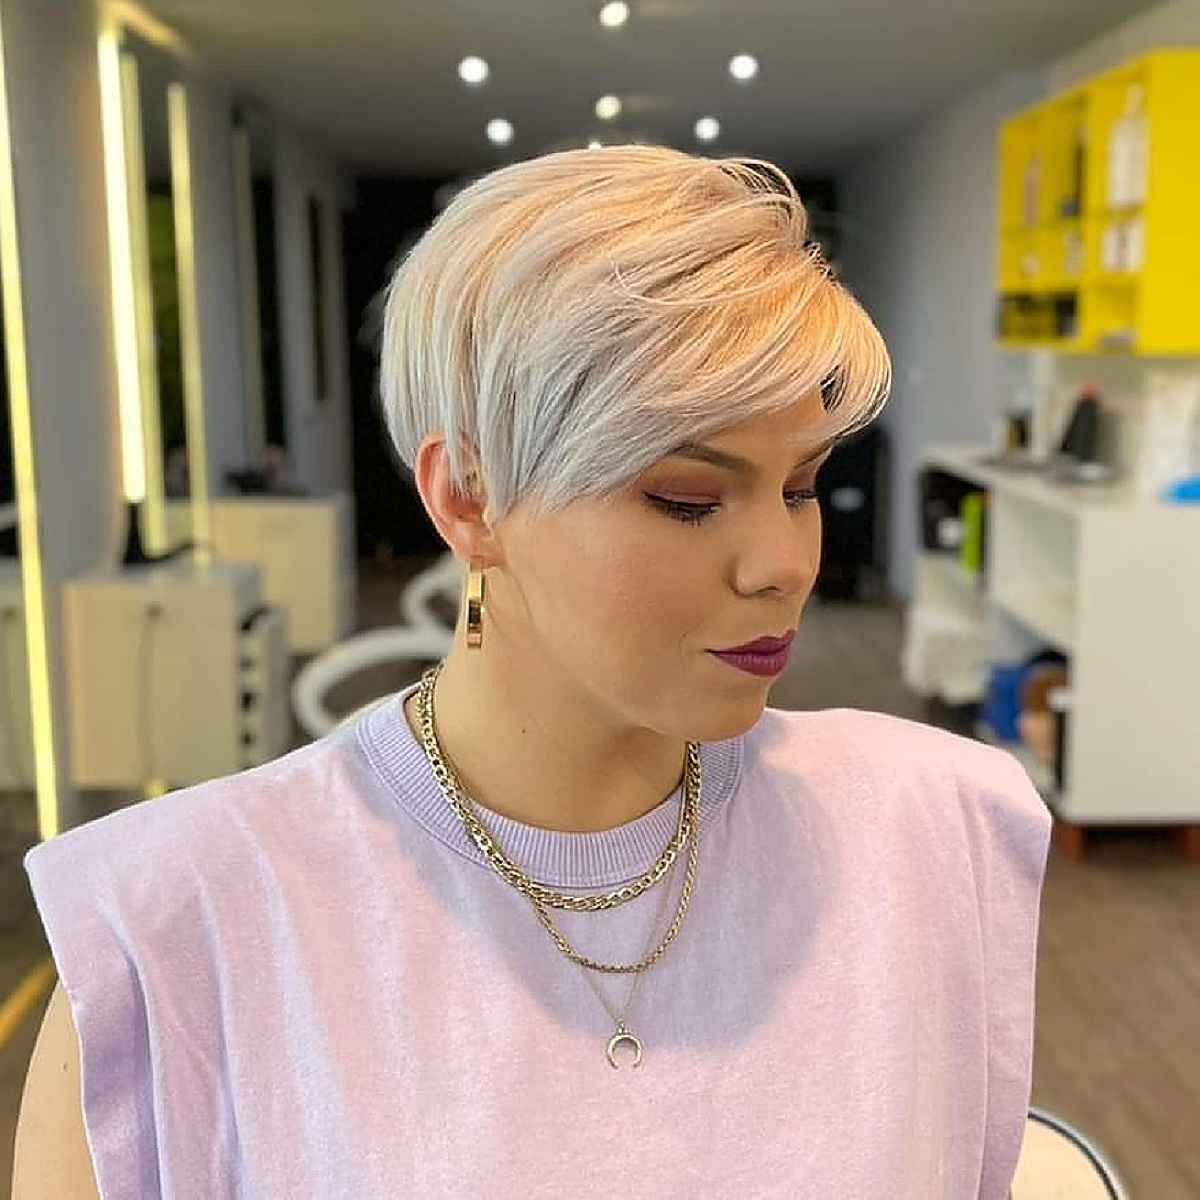 Long Pixie Crop with a Side-Swept Fringe